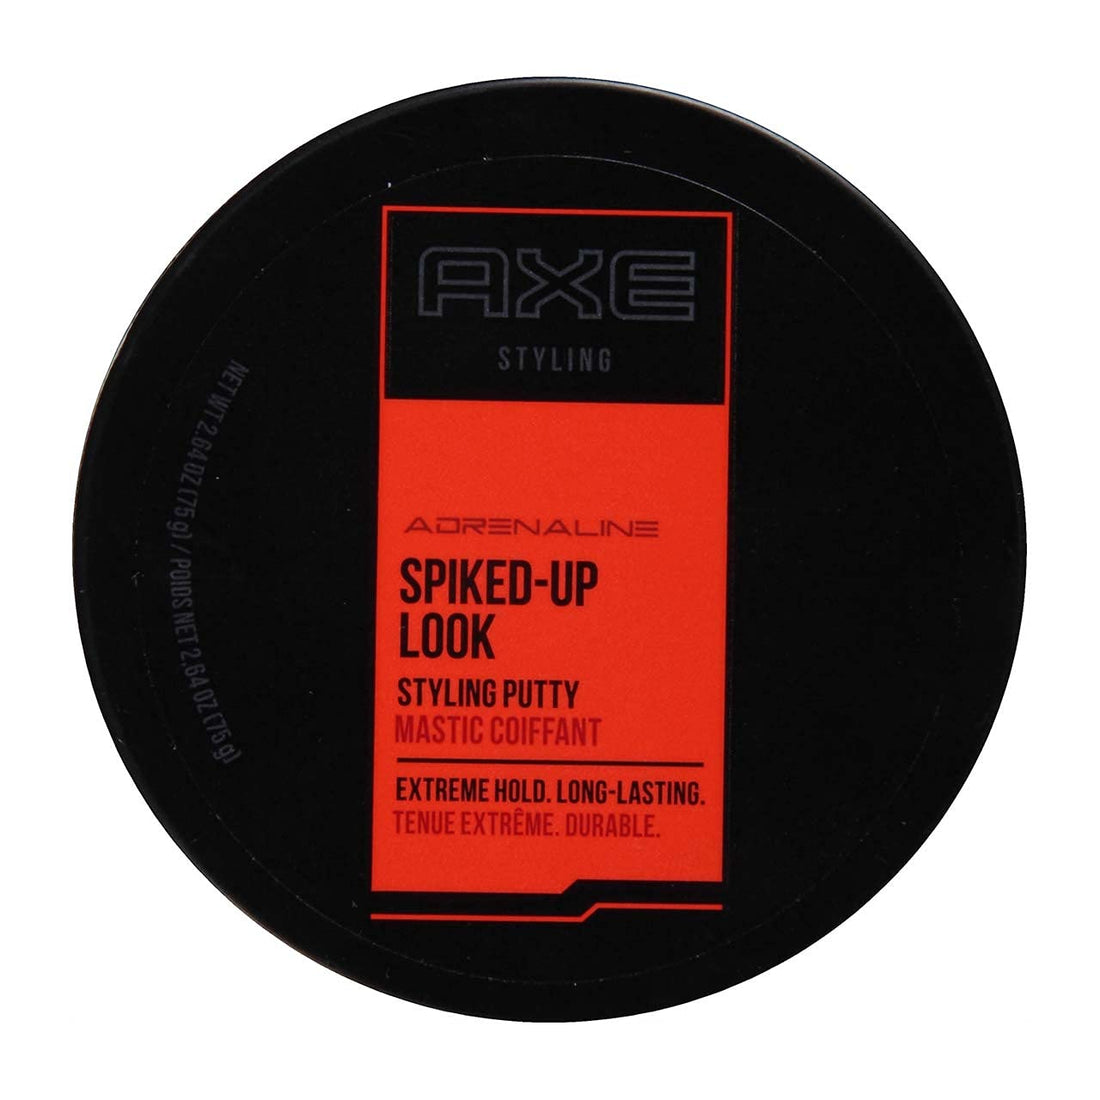 AXE Spiked Up Look Styling Putty, 2.64 Ounce, Pack of 1